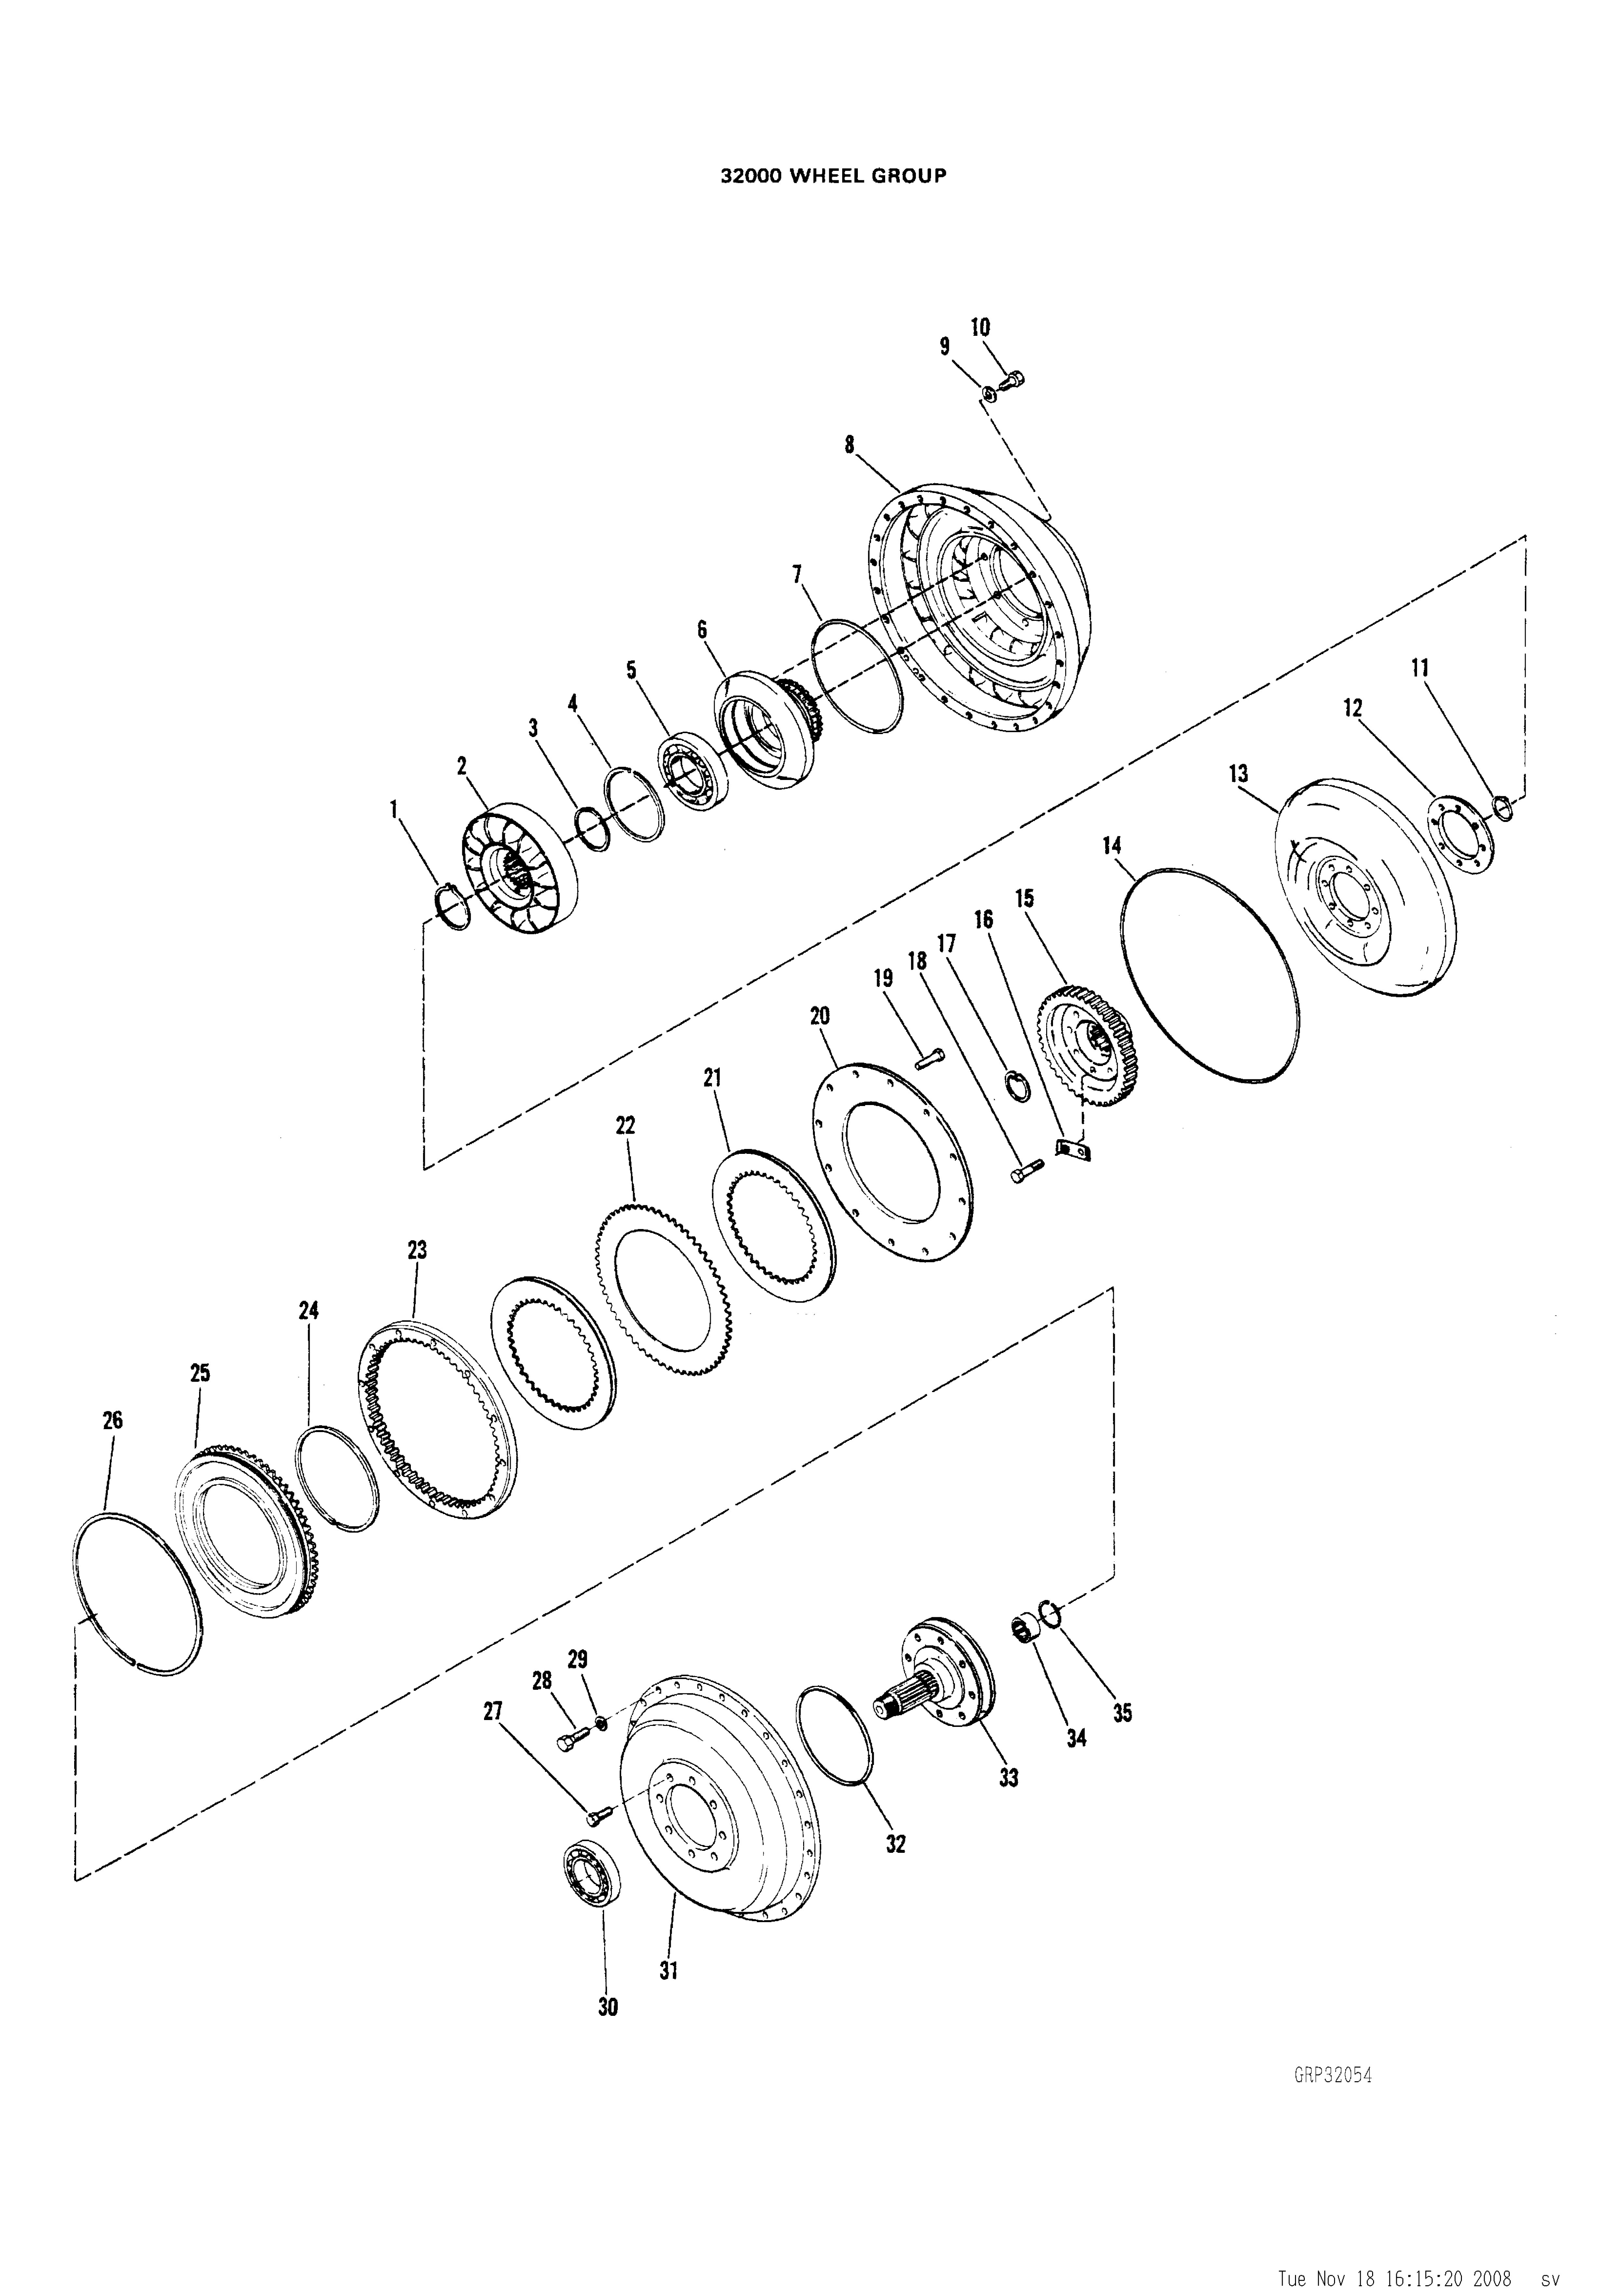 drawing for NACCO GROUP 0330558 - RING (figure 3)